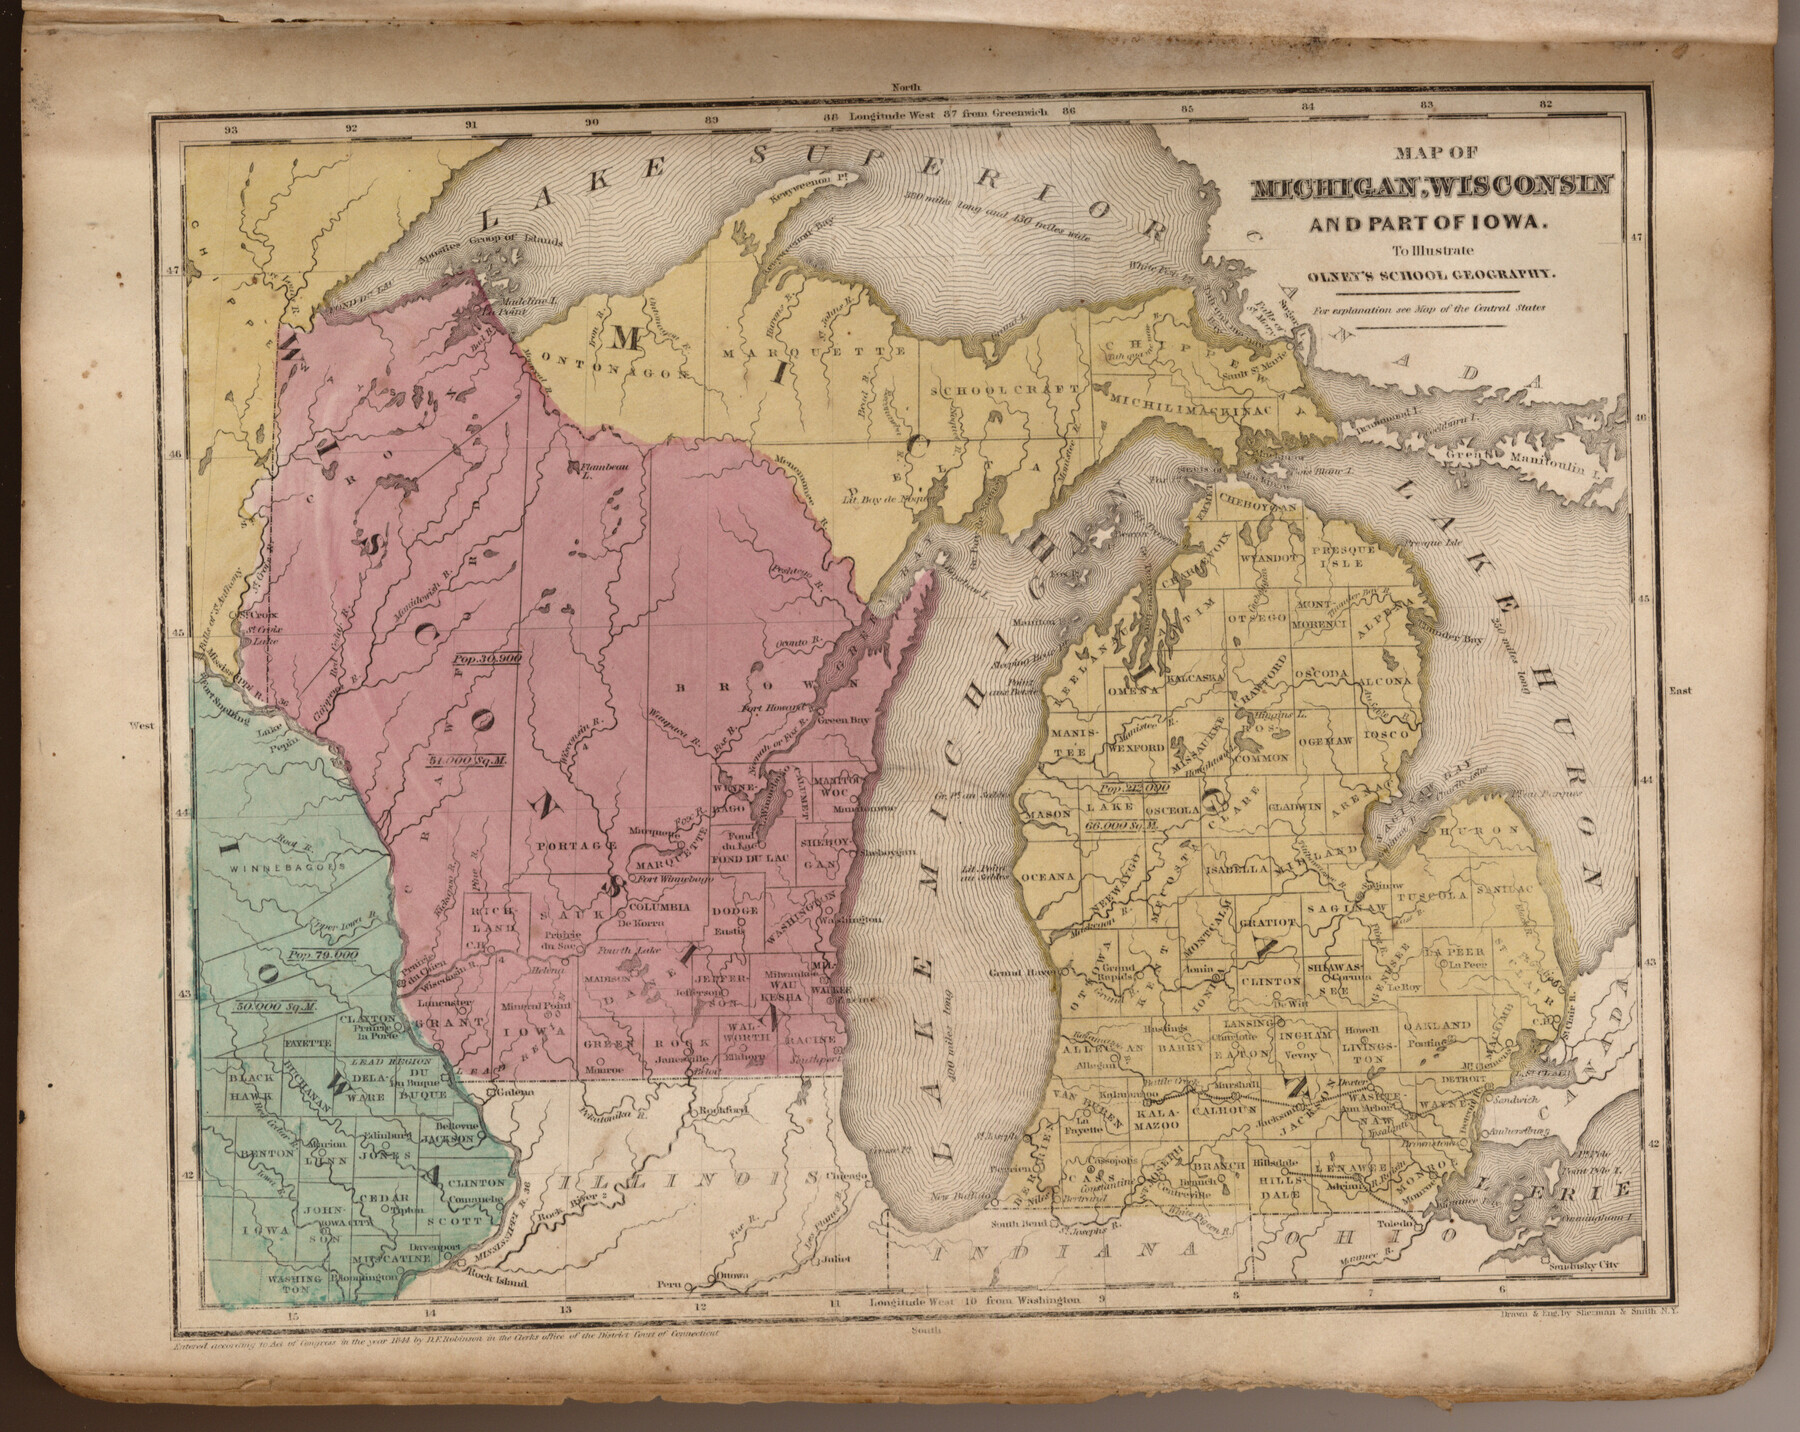 93542, Map of Michigan, Wisconsin and part of Iowa to illustrate Olney's school geography, General Map Collection